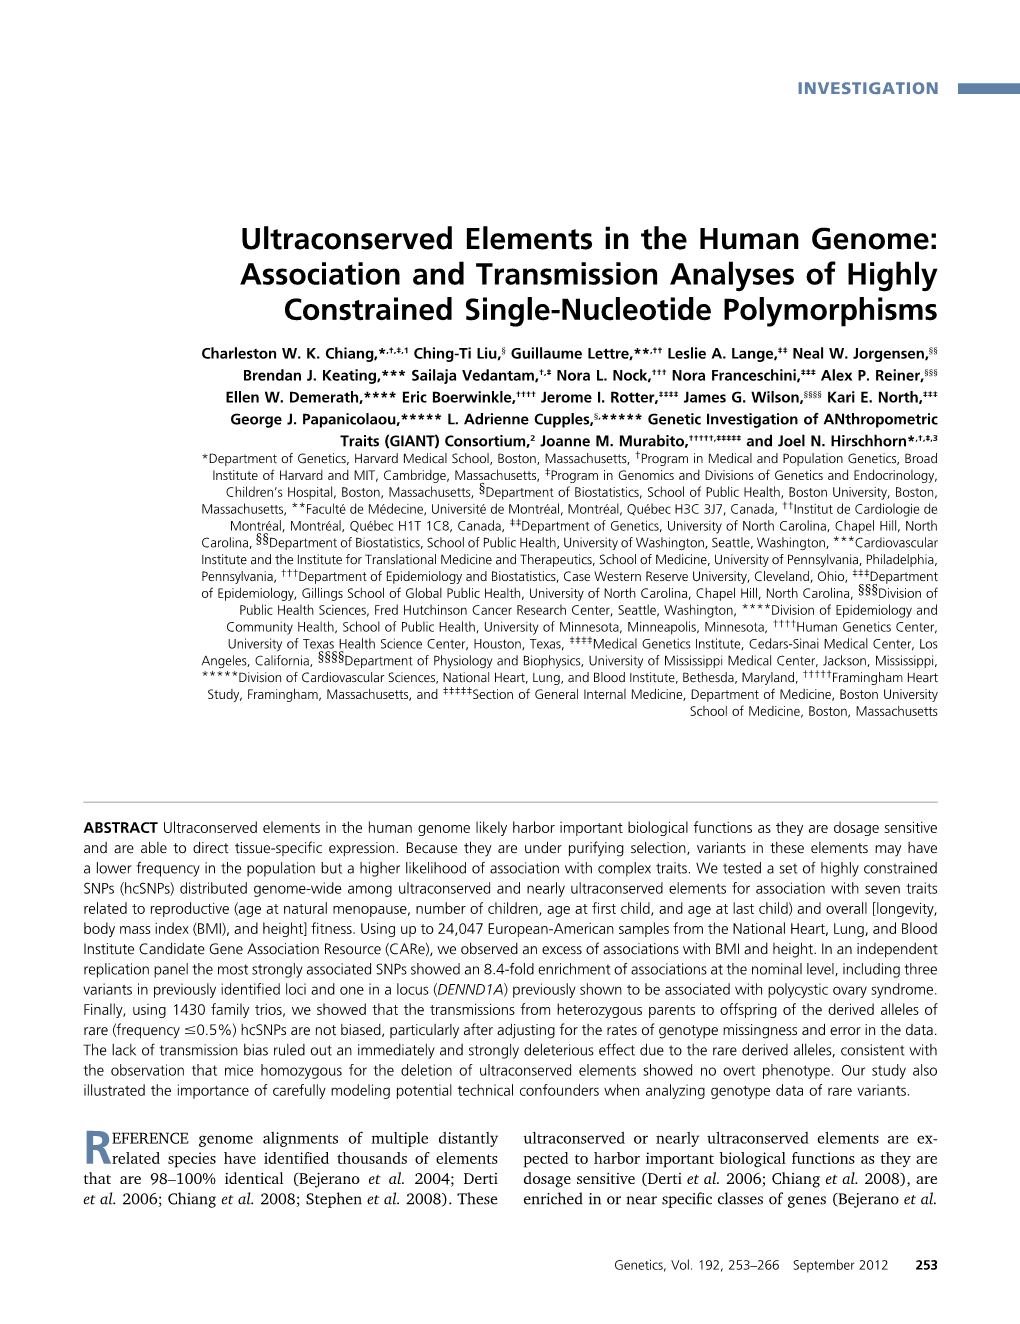 Ultraconserved Elements in the Human Genome: Association and Transmission Analyses of Highly Constrained Single-Nucleotide Polymorphisms